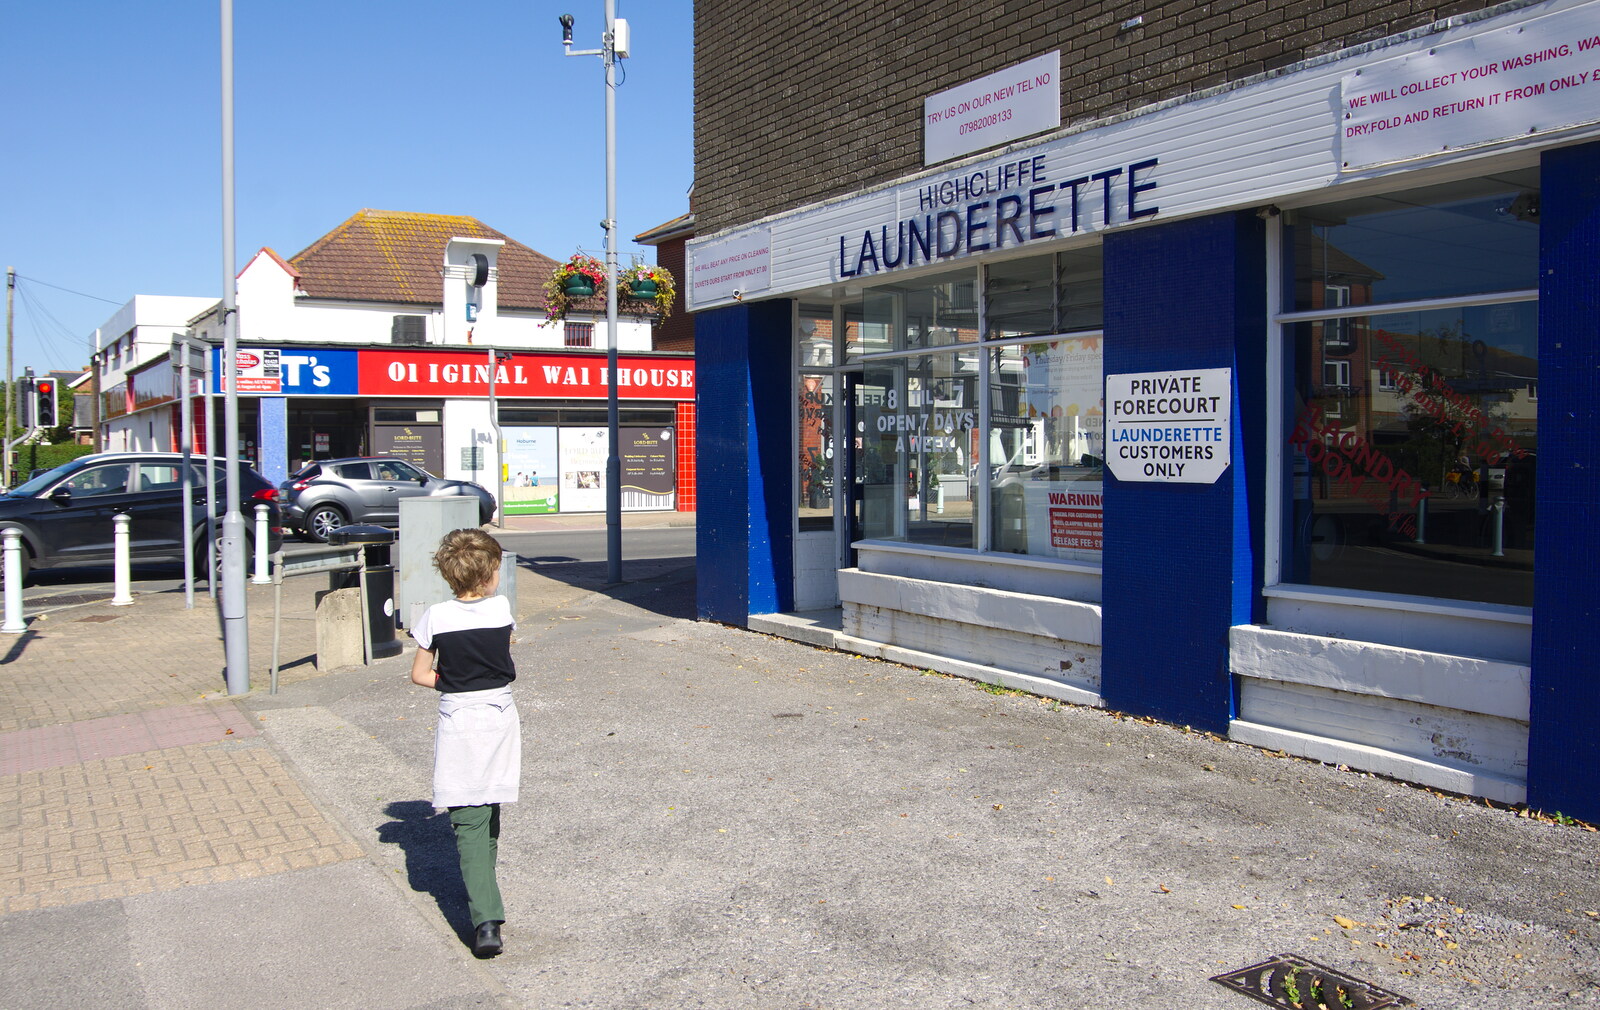 Fred outside the Highcliffe Laundrette from A Trip to the South Coast, Highcliffe, Dorset - 20th September 2019